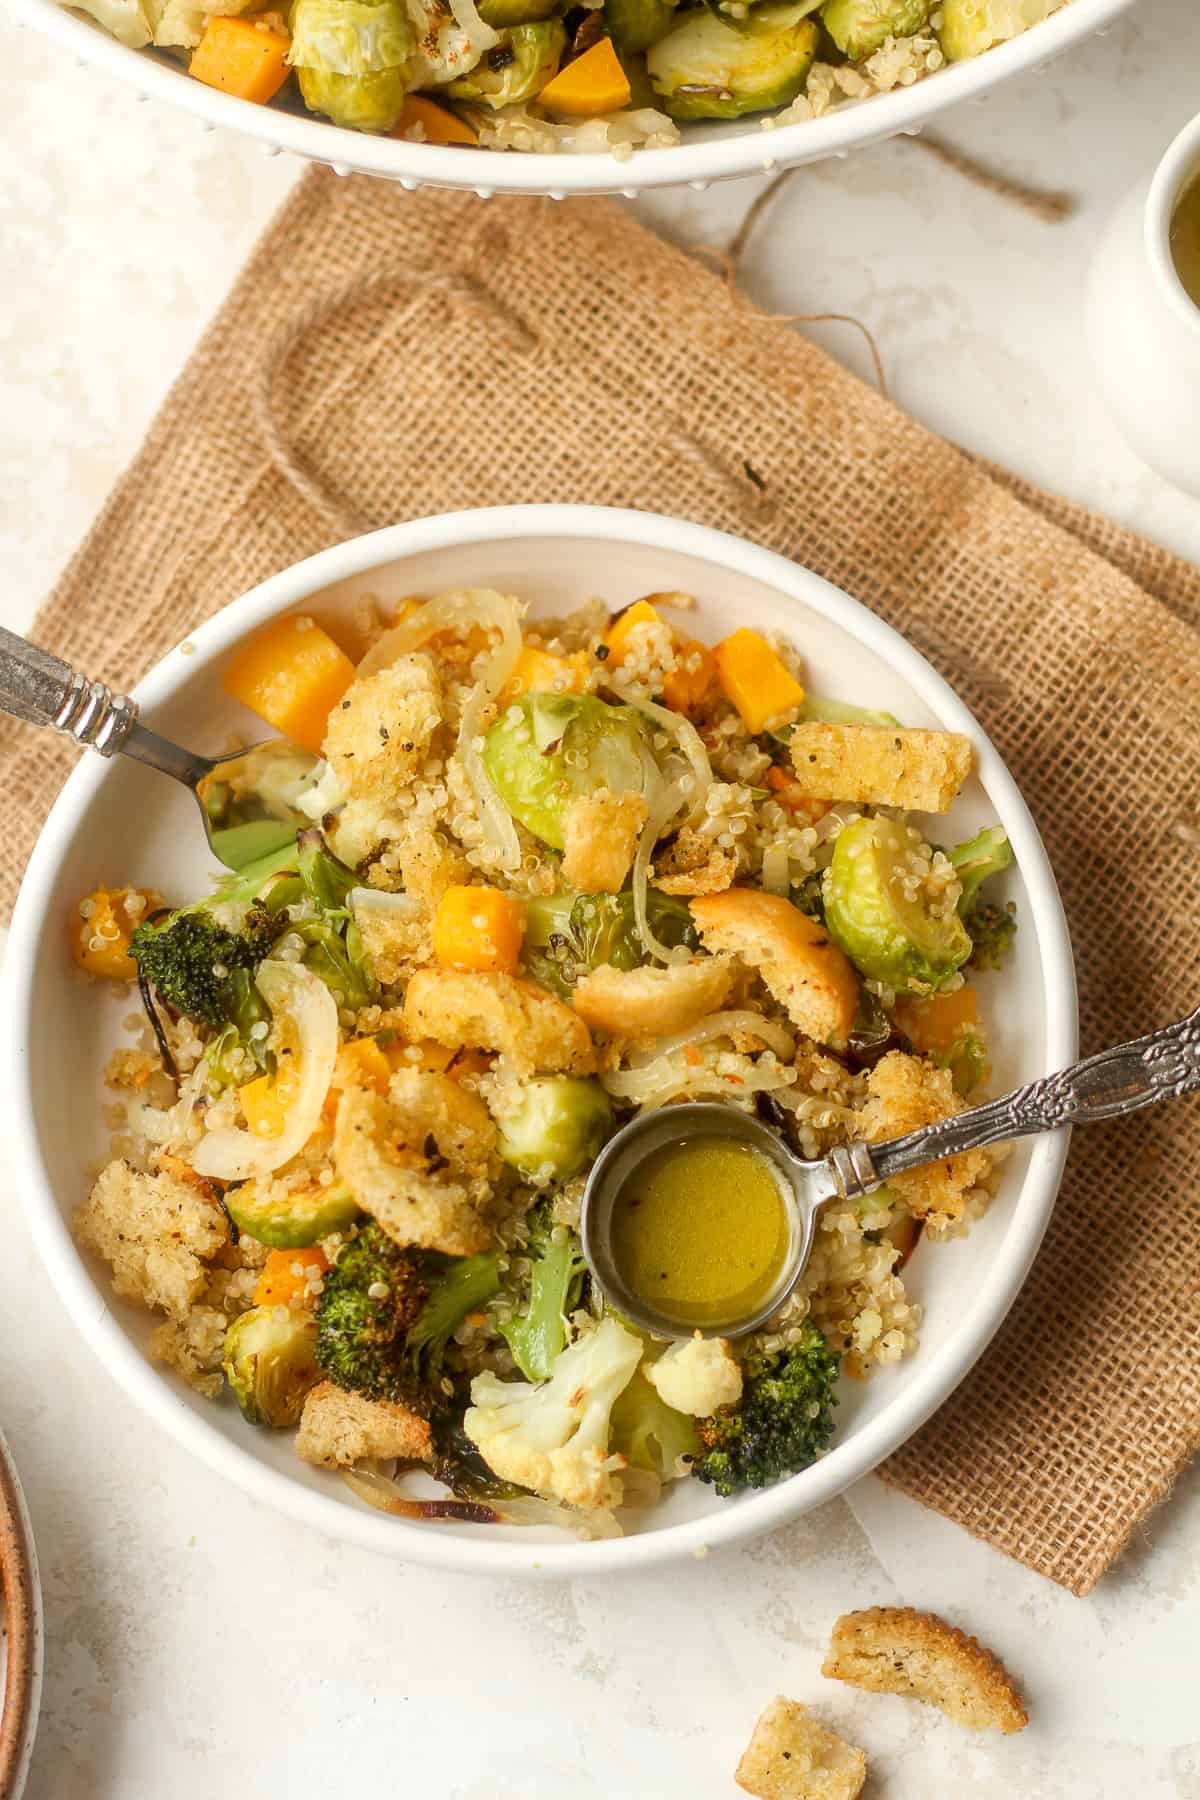 A serving of the roasted veg quinoa salad with a tablespoon of lemon dressing and homemade croutons.